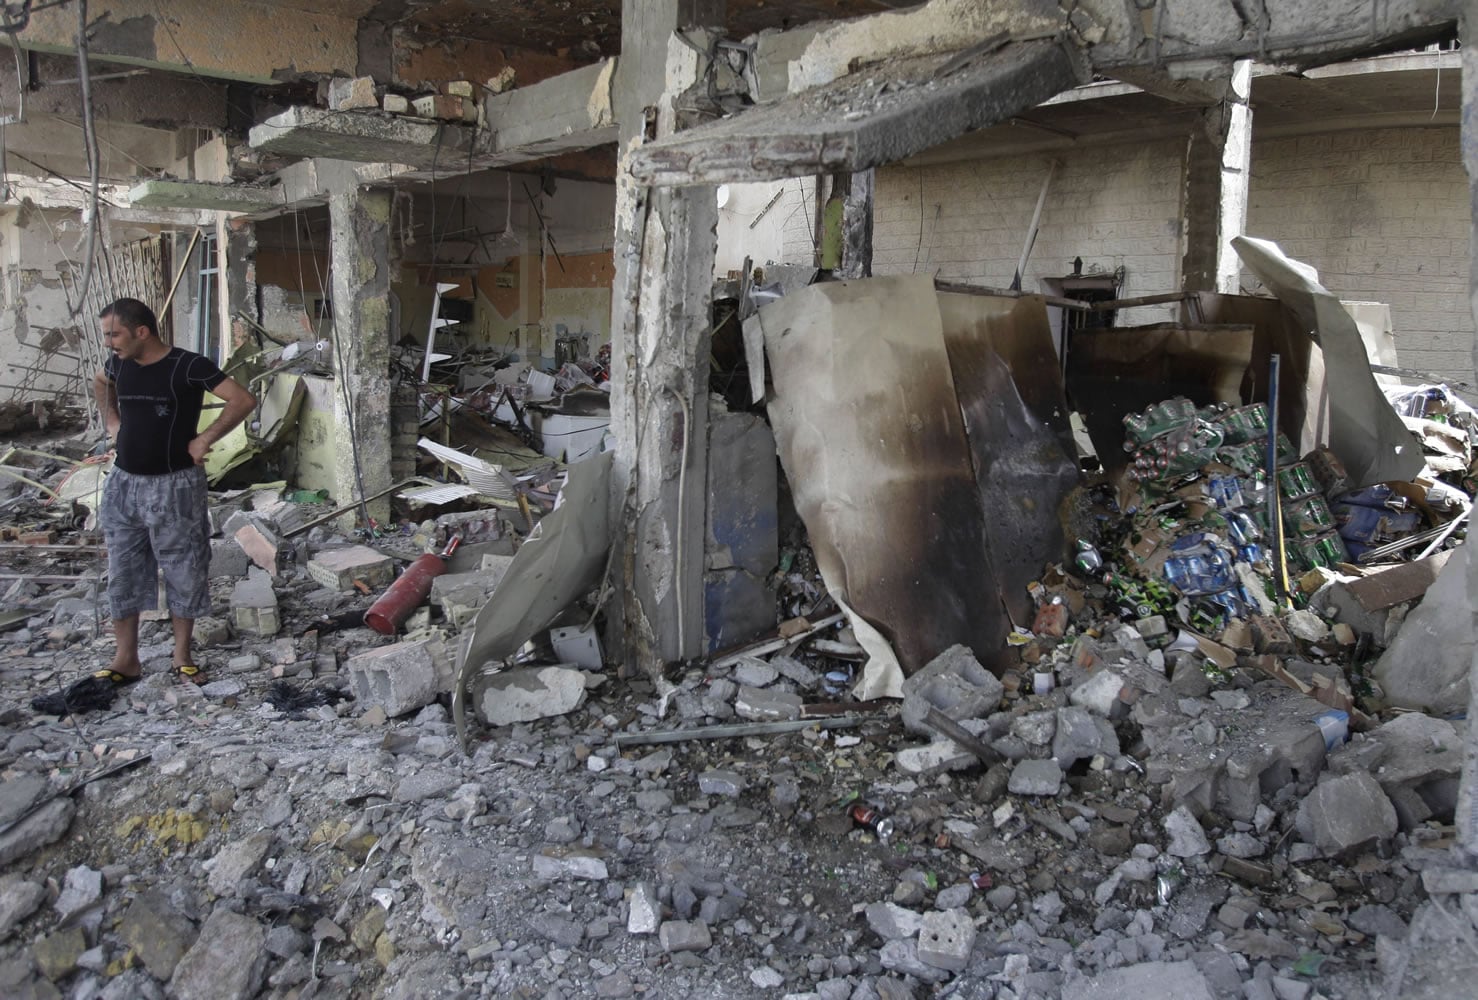 An Iraqi man inspects a destroyed liquor store after a bomb attack Thursday in Baghdad.